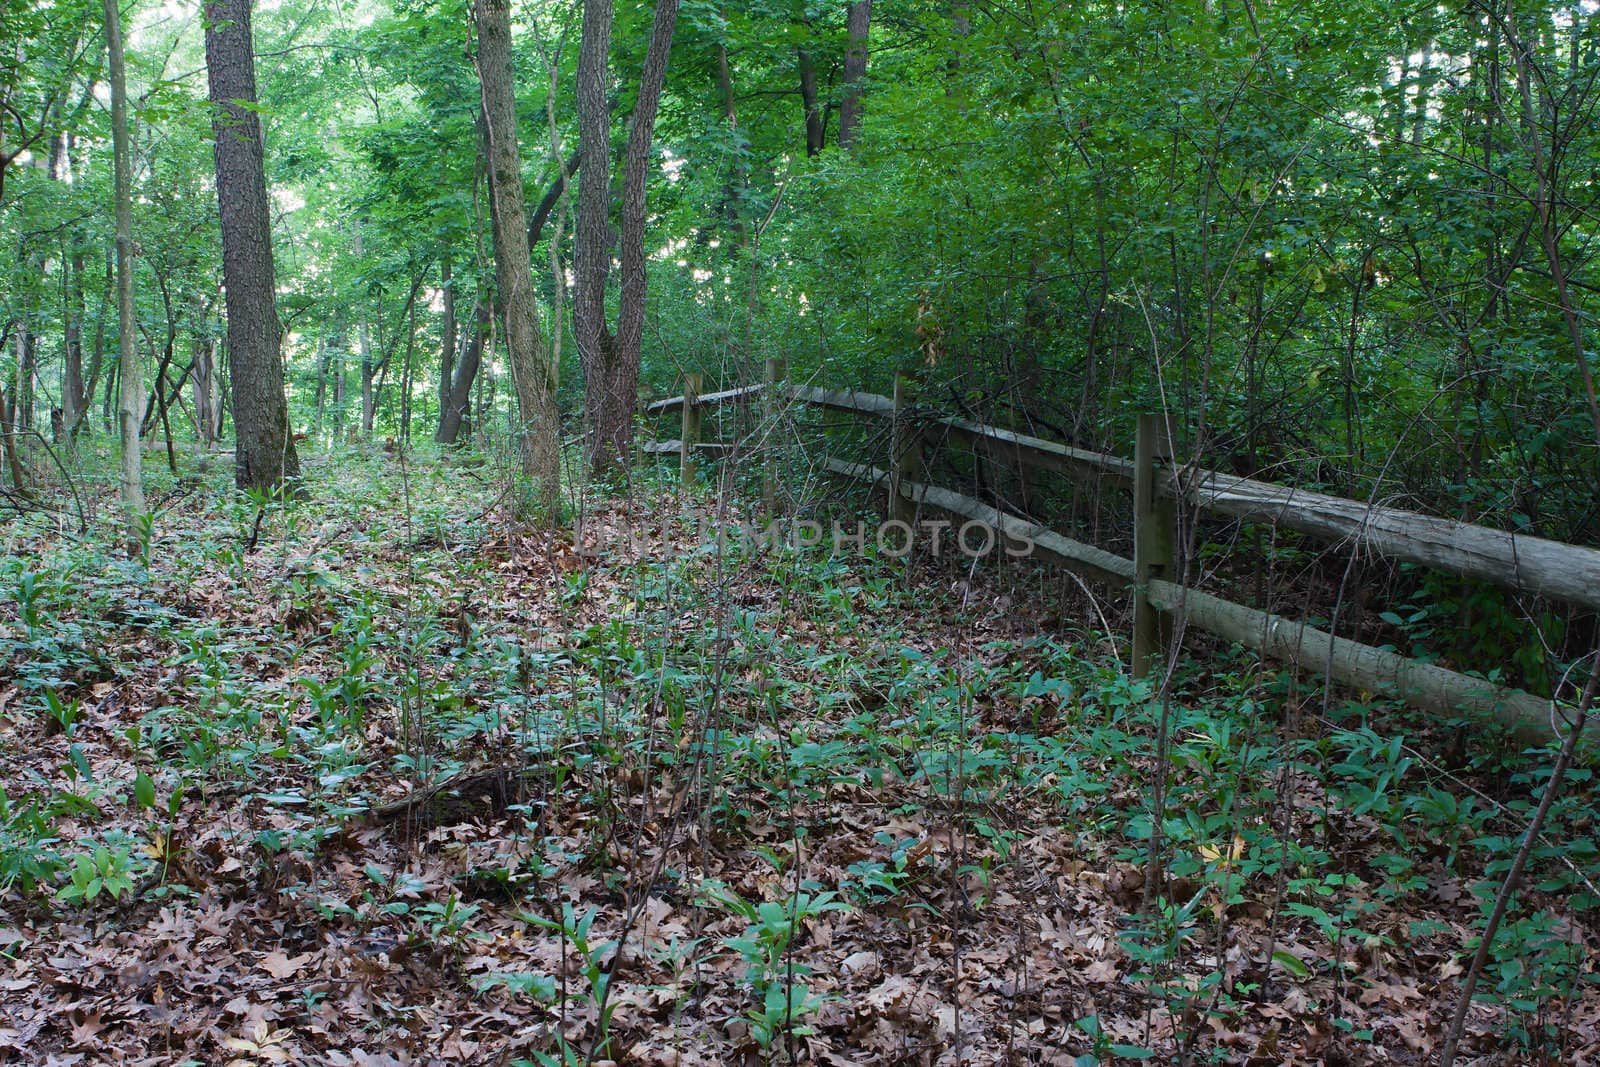 Wooden fence leading into a green forest.